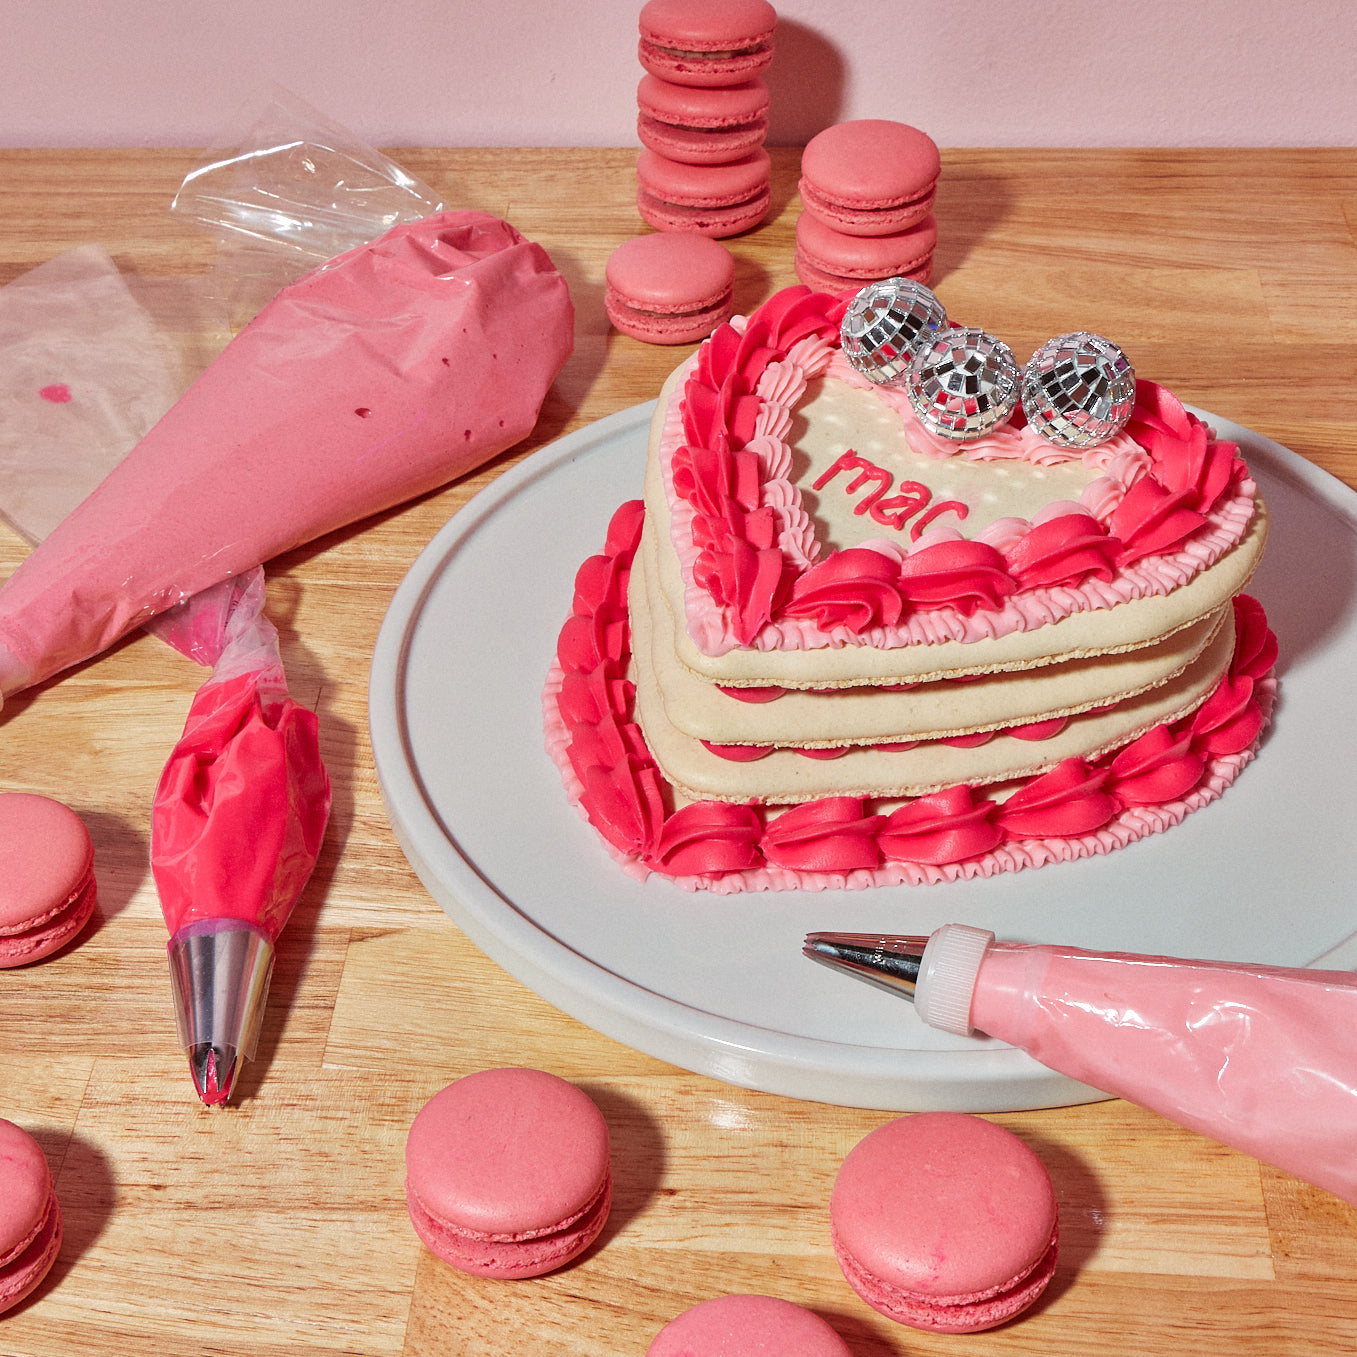 One of Maddie About Cake's signature heart shaped macaron layer cakes, complete with different shades of pink icing, custom text, and mini disco balls. The cake is surrounded by pink, strawberry macarons and three piping bags of pink icing.